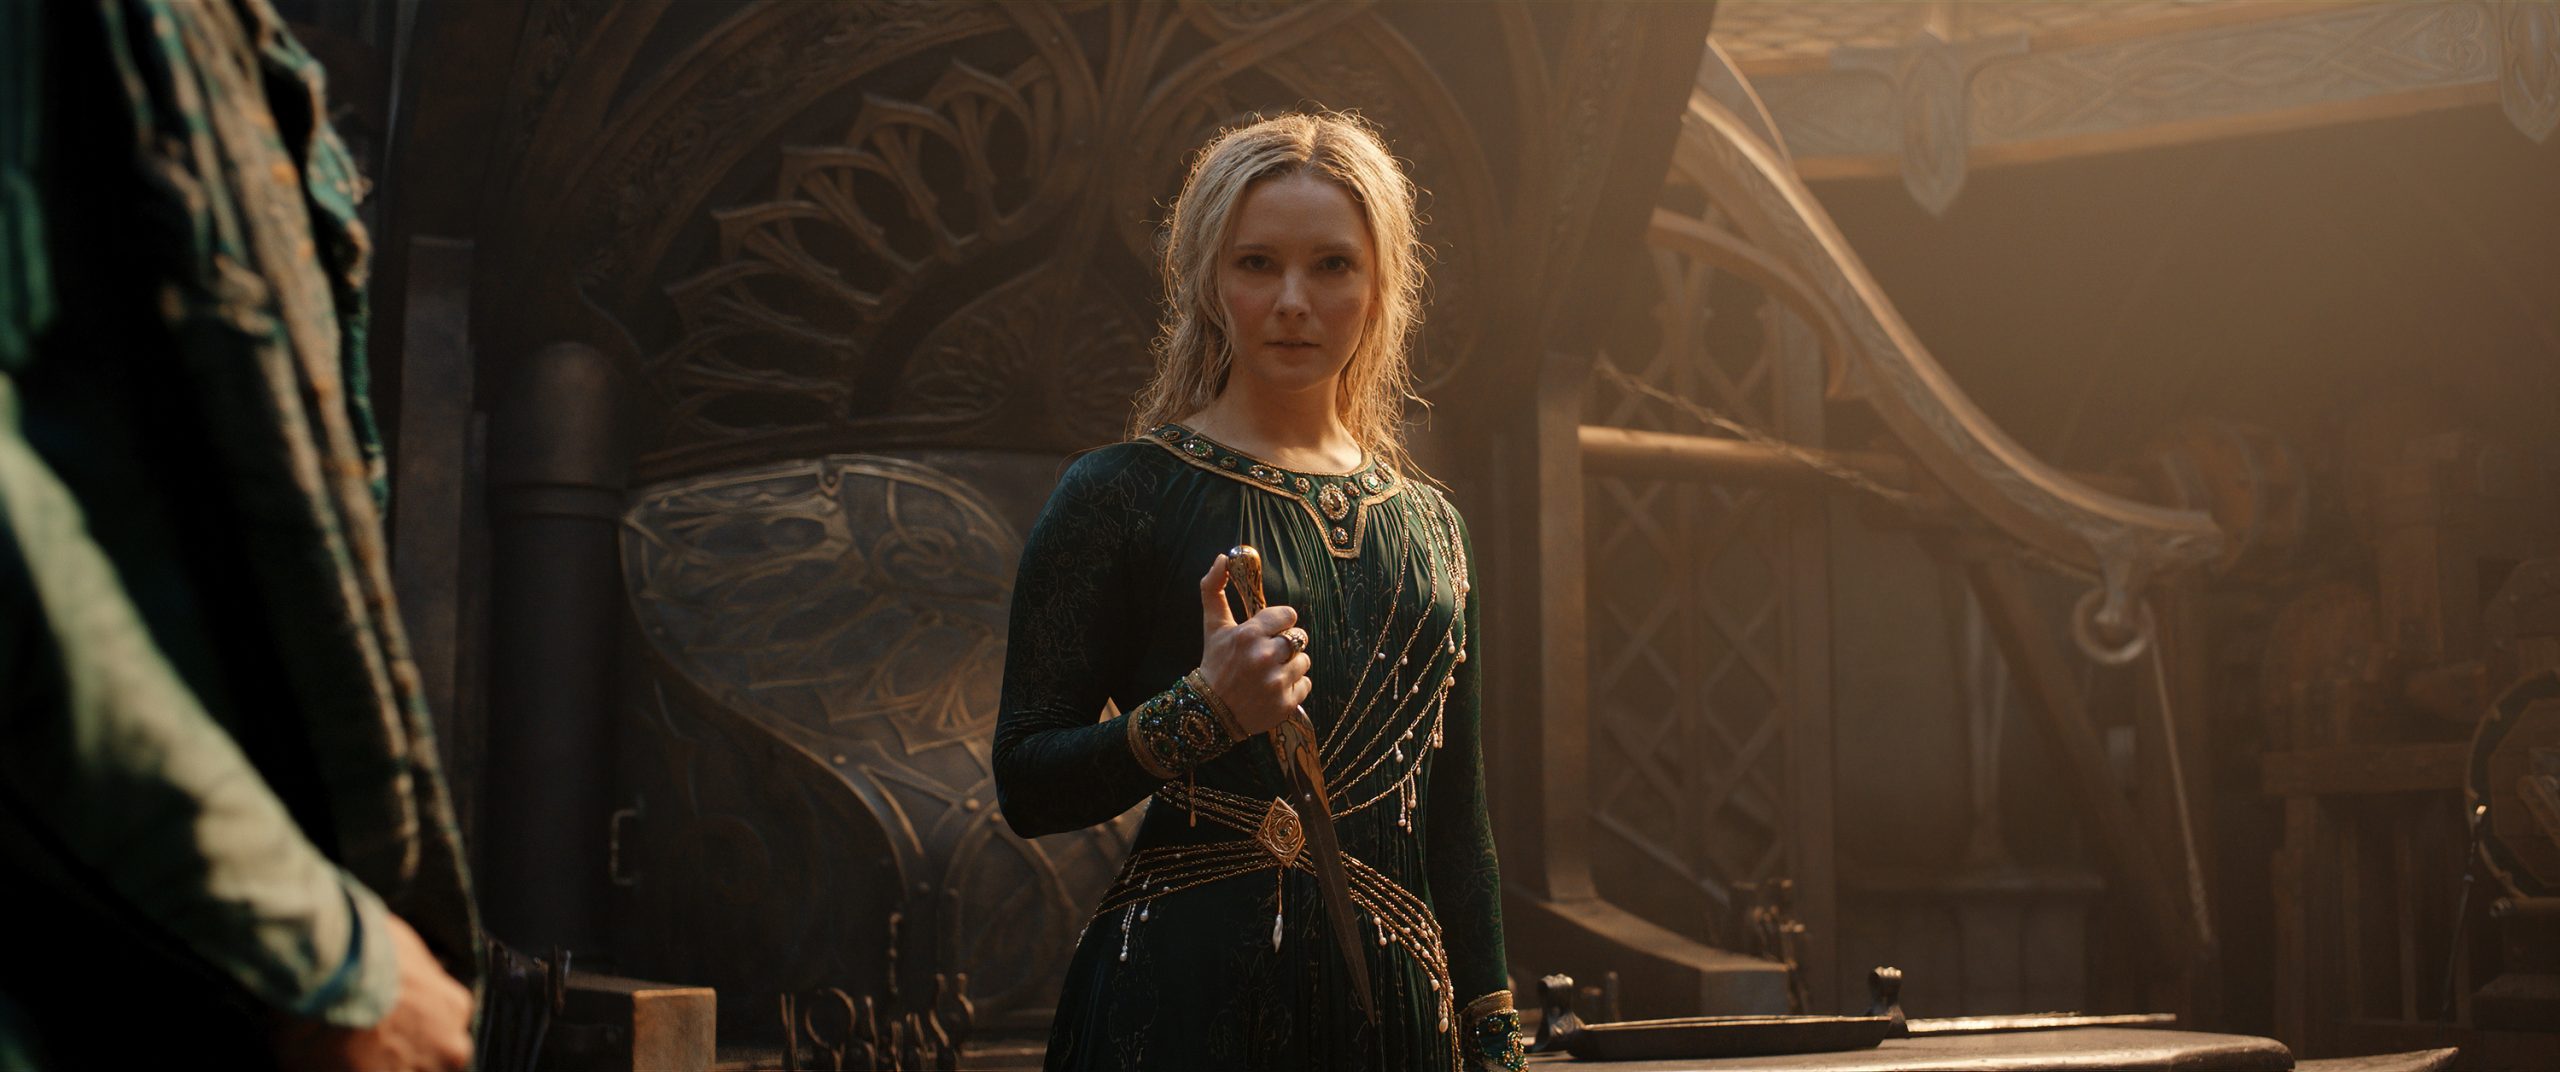 Galadriel (Morfydd Clark) prepares to reconcile with her past and smelt her brother's dagger in The Lord of the Rings: The Rings of Power Season 1 Episode 8 "Alloyed" (2022), Amazon Studios